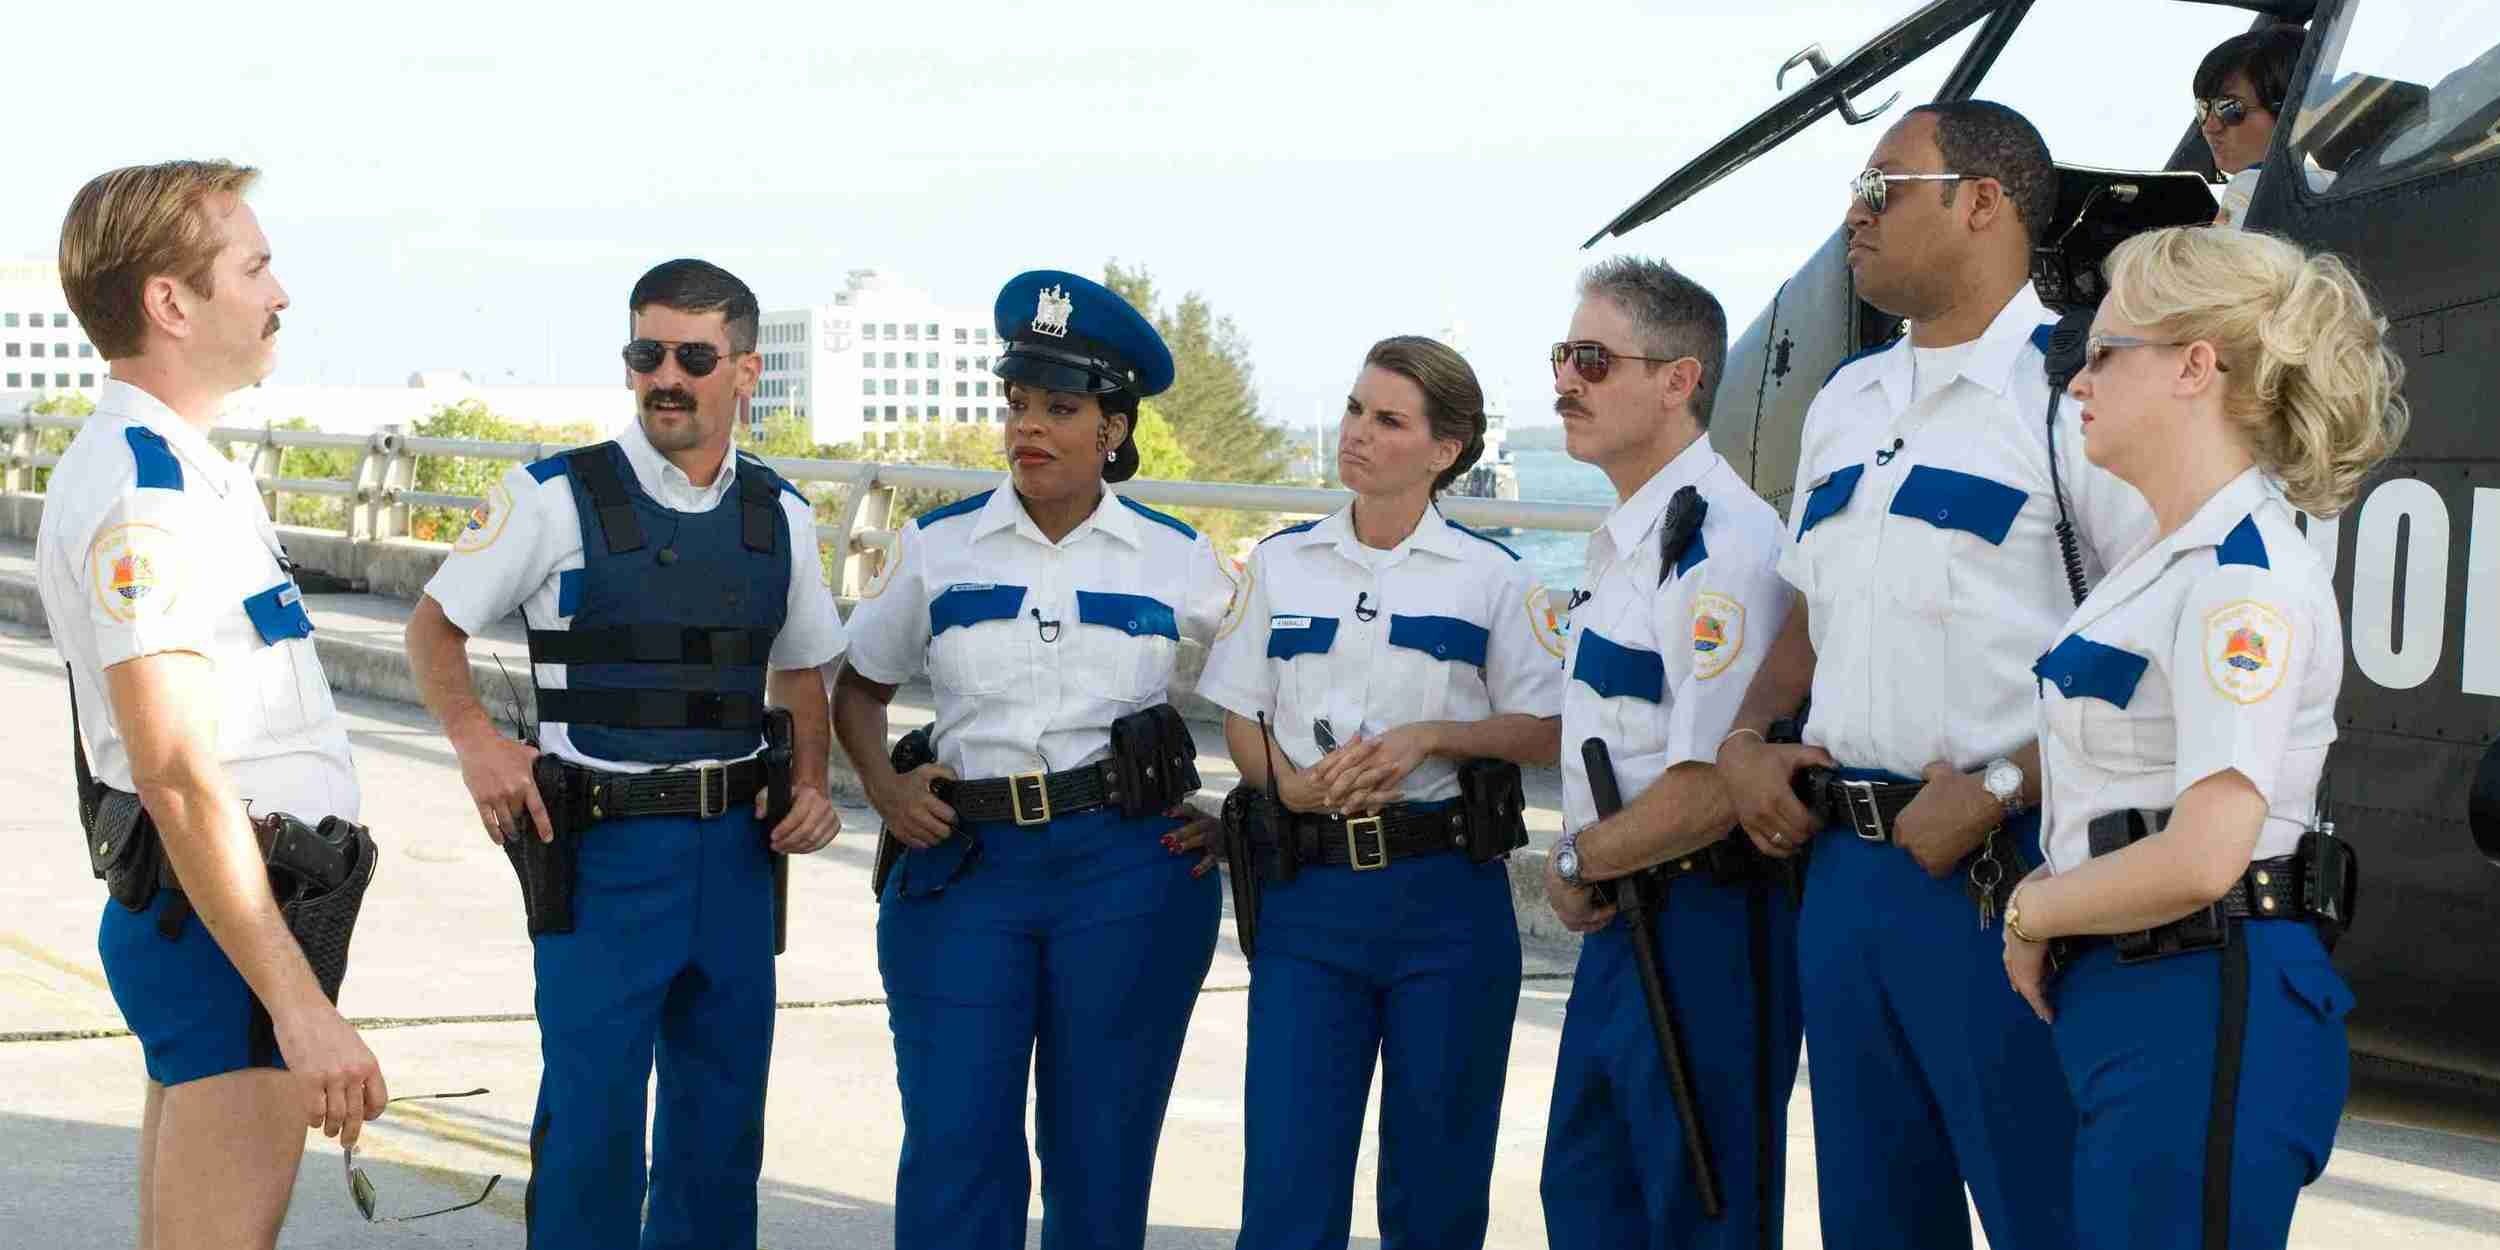 The cast of Reno 911 Miami, being briefed by Jim